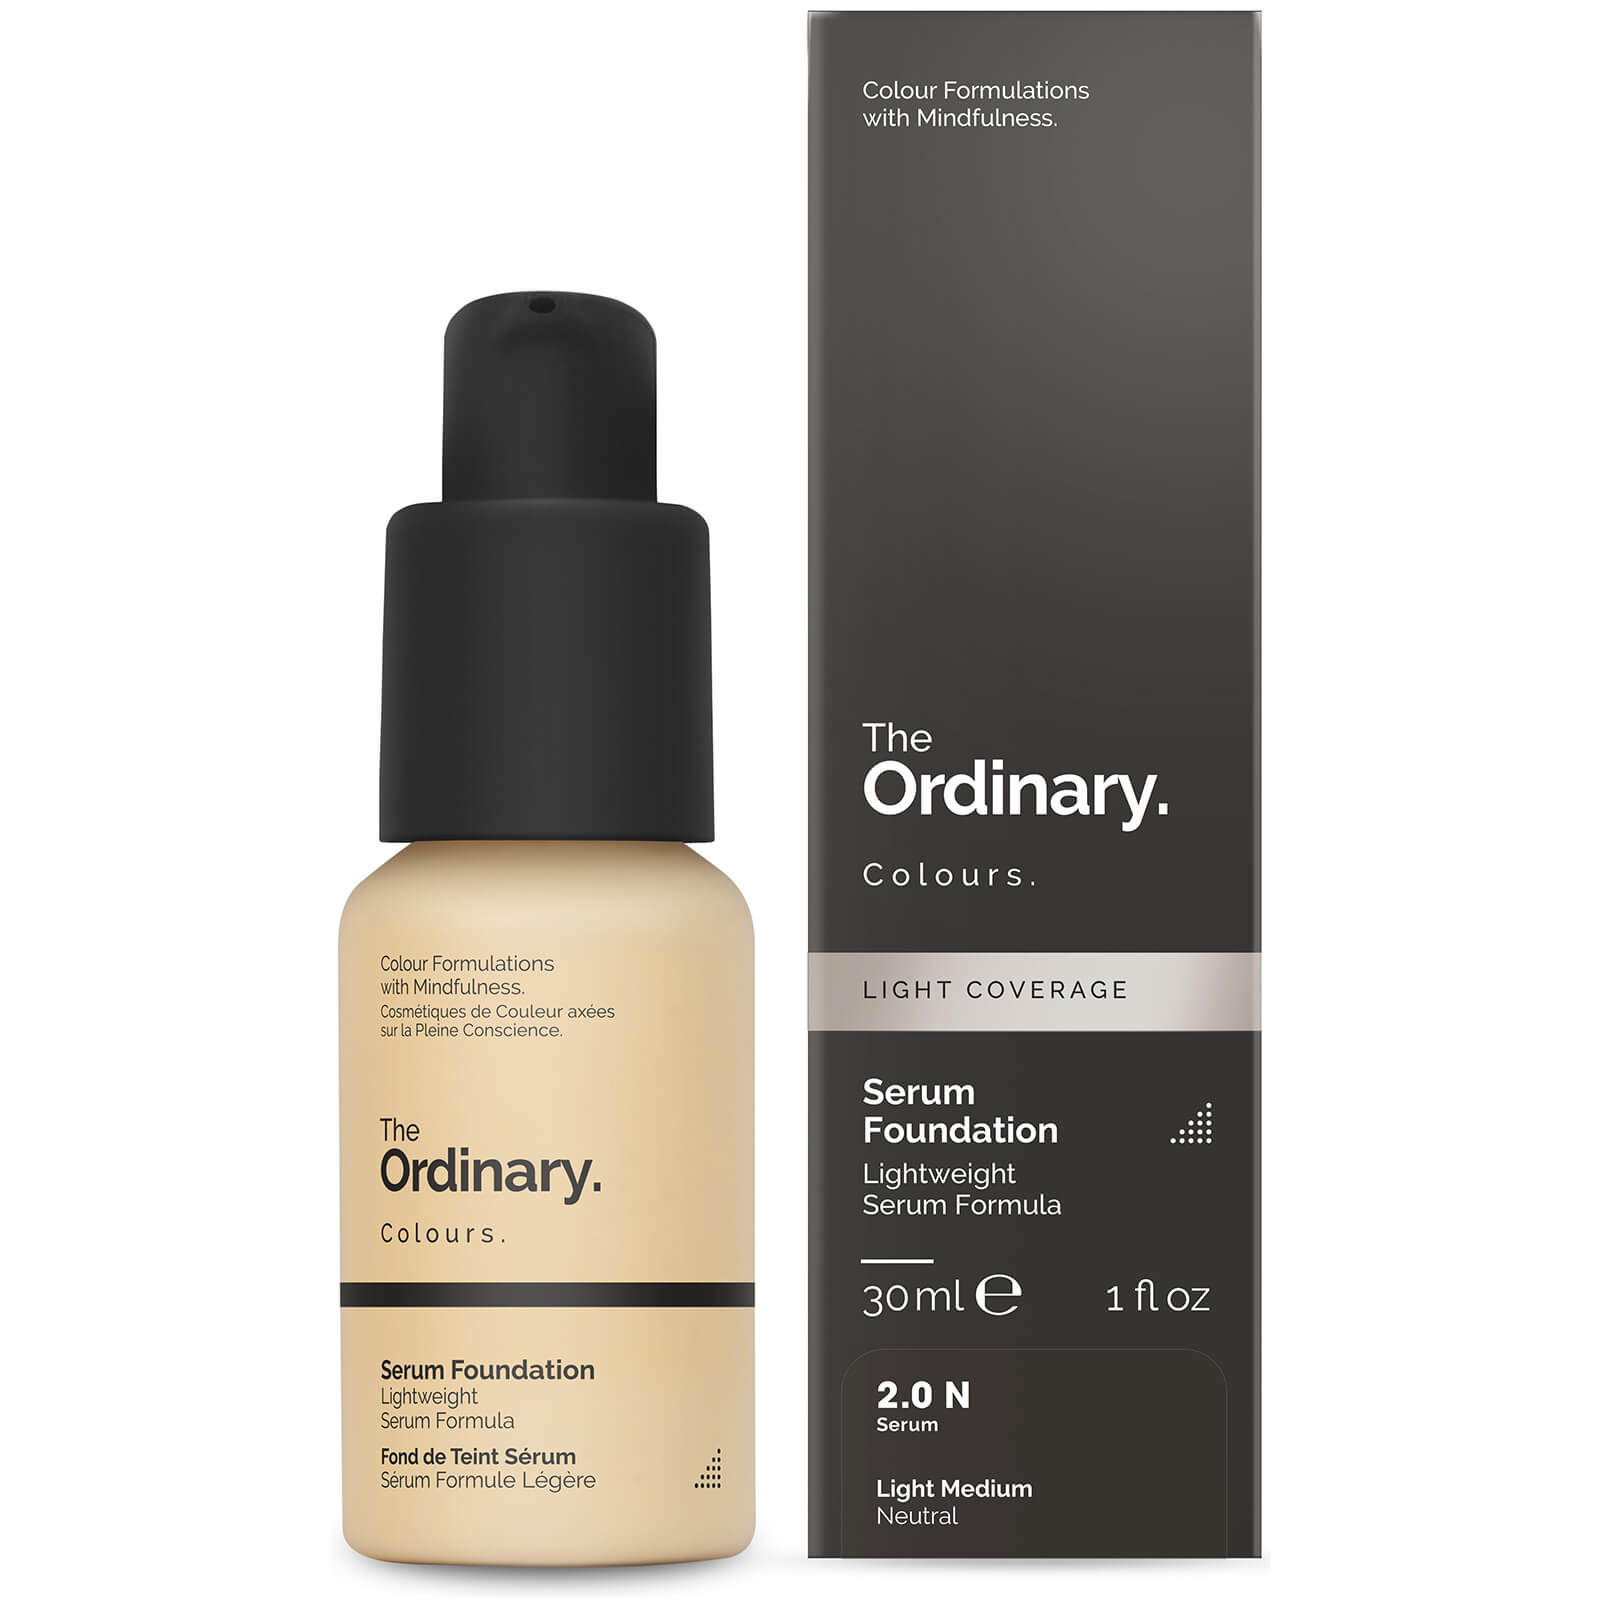 The Ordinary Serum Foundation with SPF 15 by The Ordinary Colours 30ml (Various Shades) - 2.0N